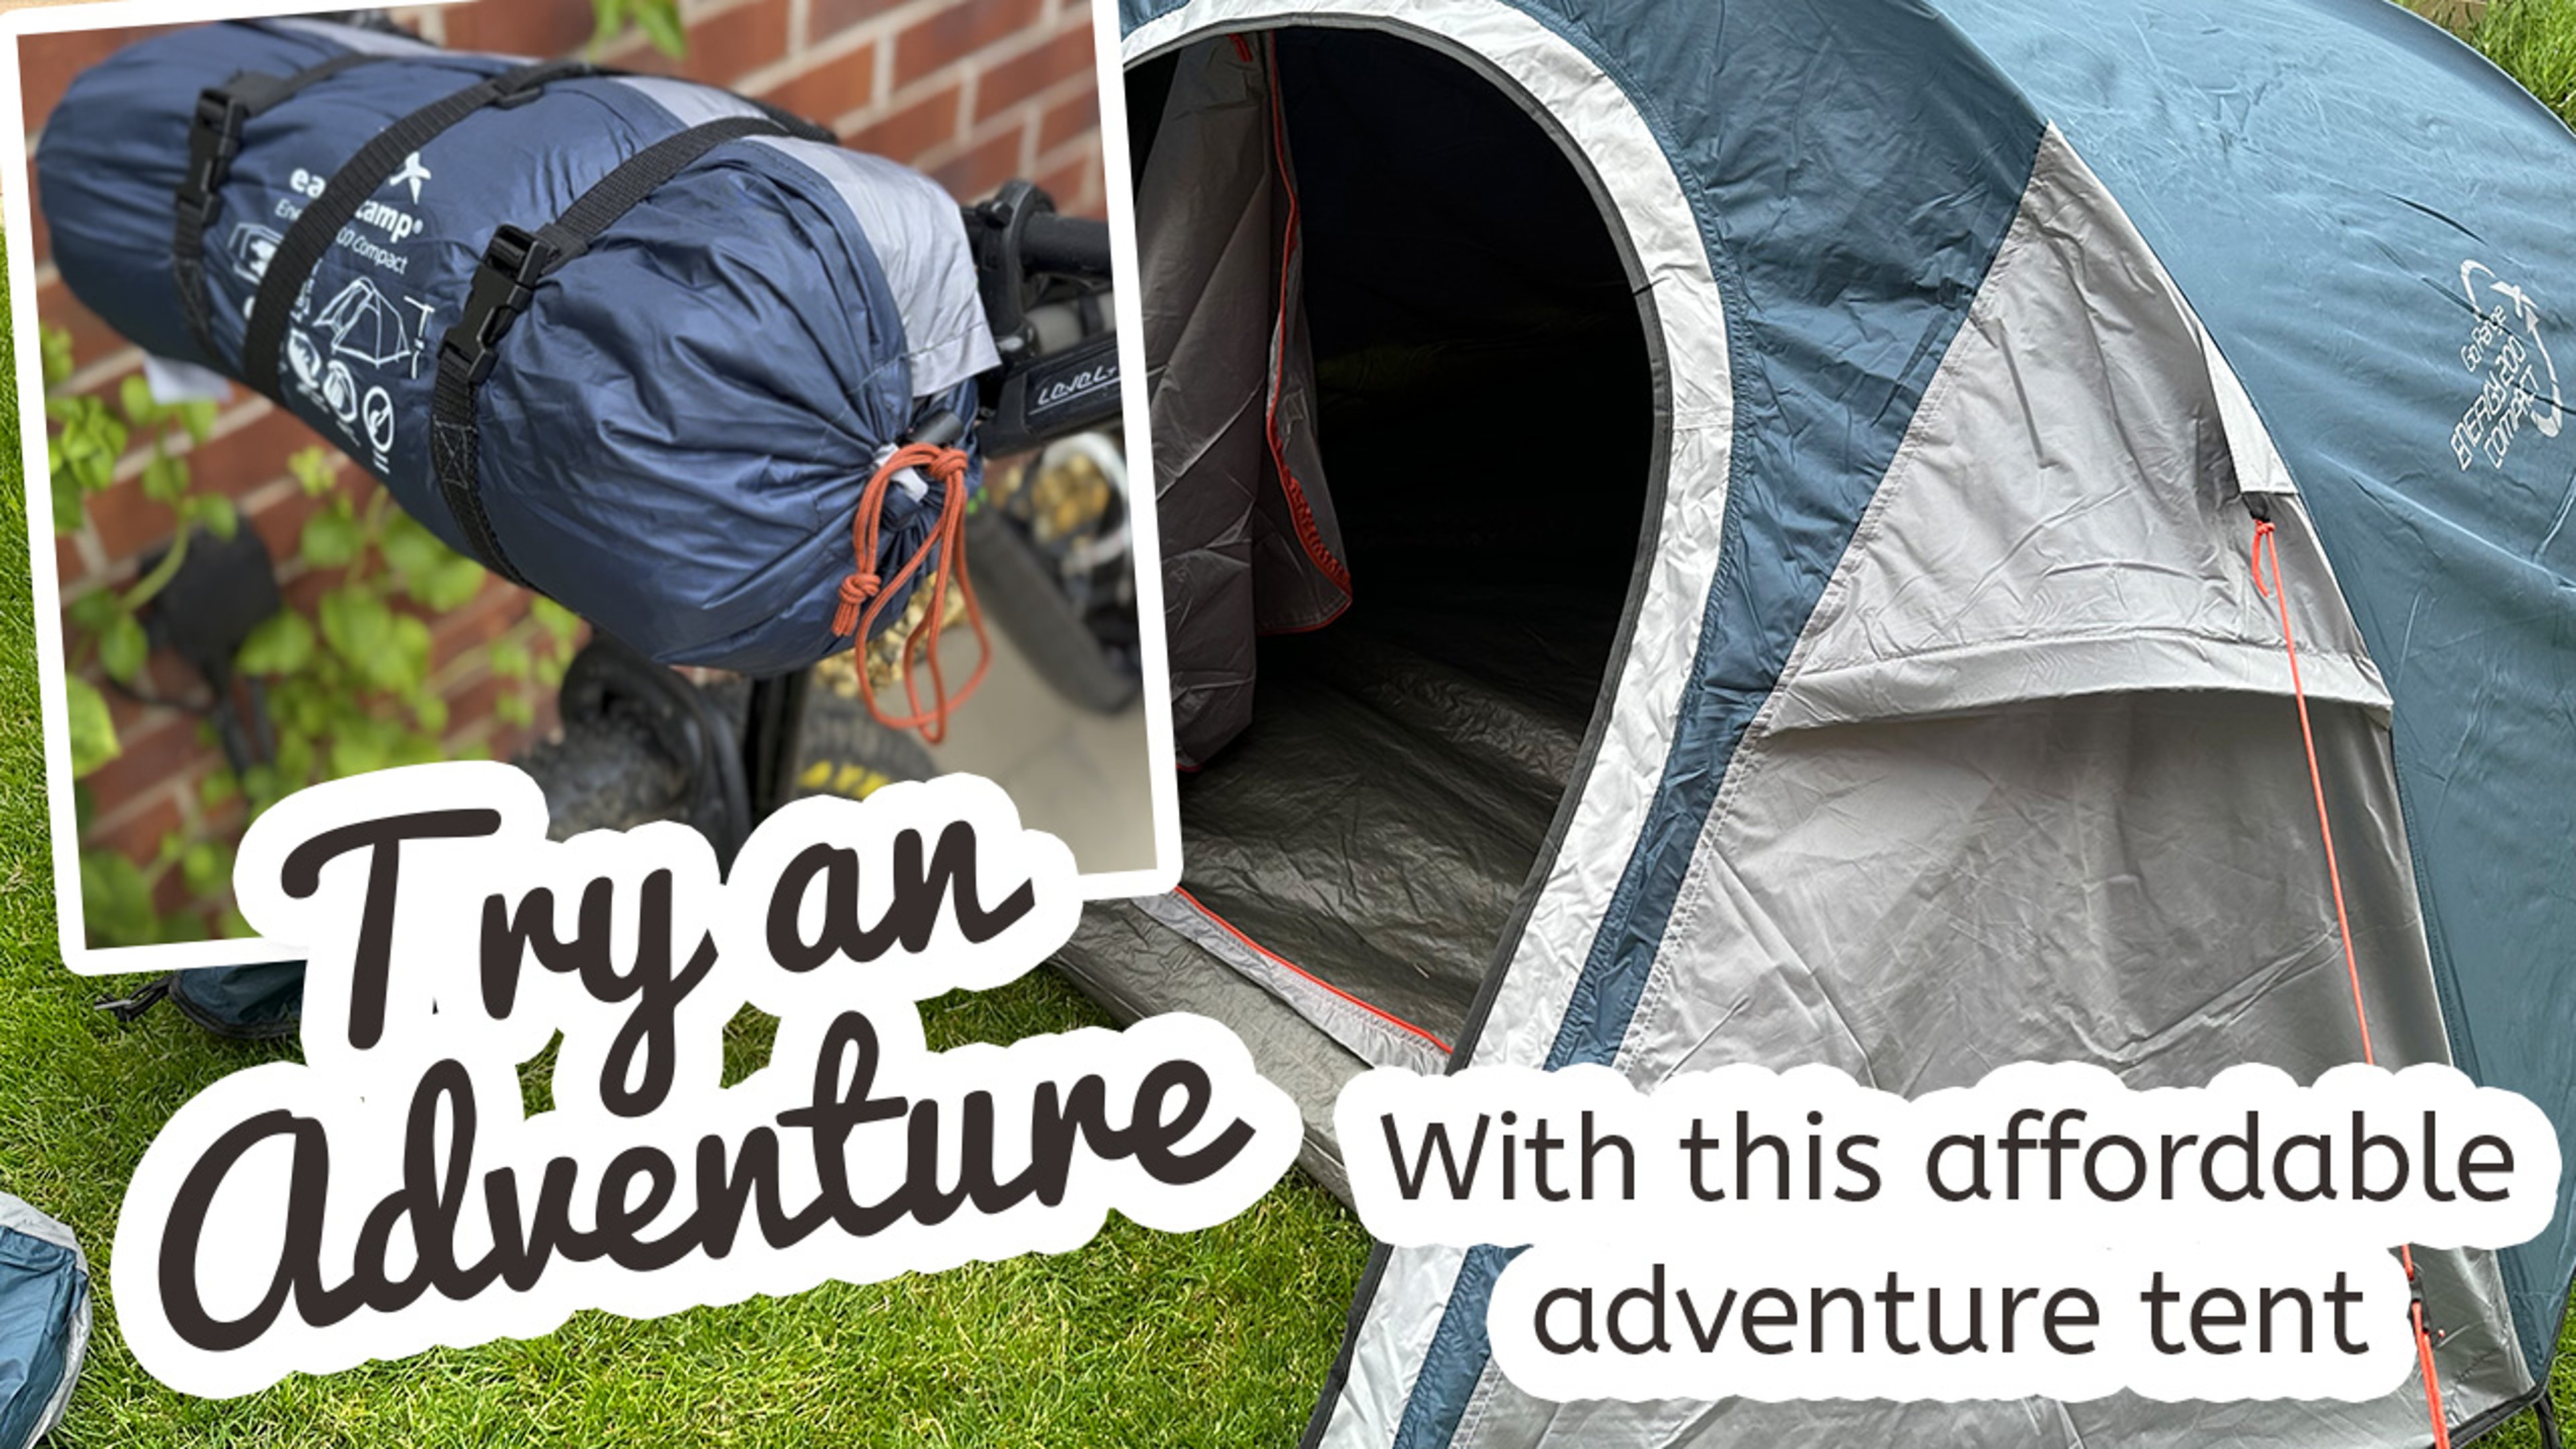 Easy Camp Energy 200 Compact adventure tent